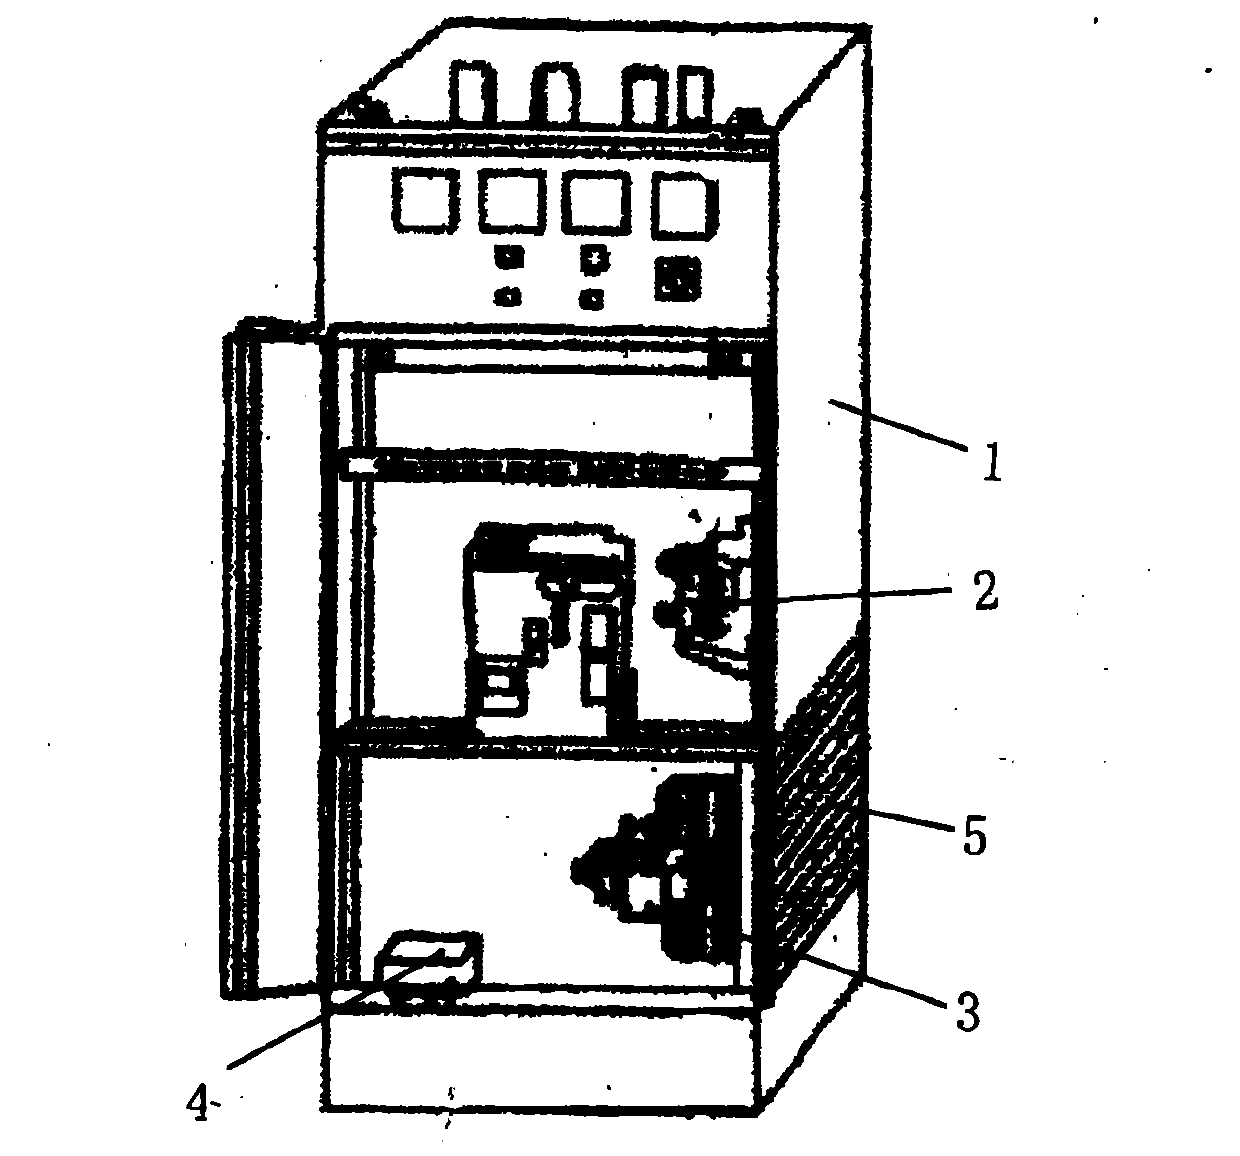 Electrical switch cabinet capable of automatically detecting and controlling temperature and humidity